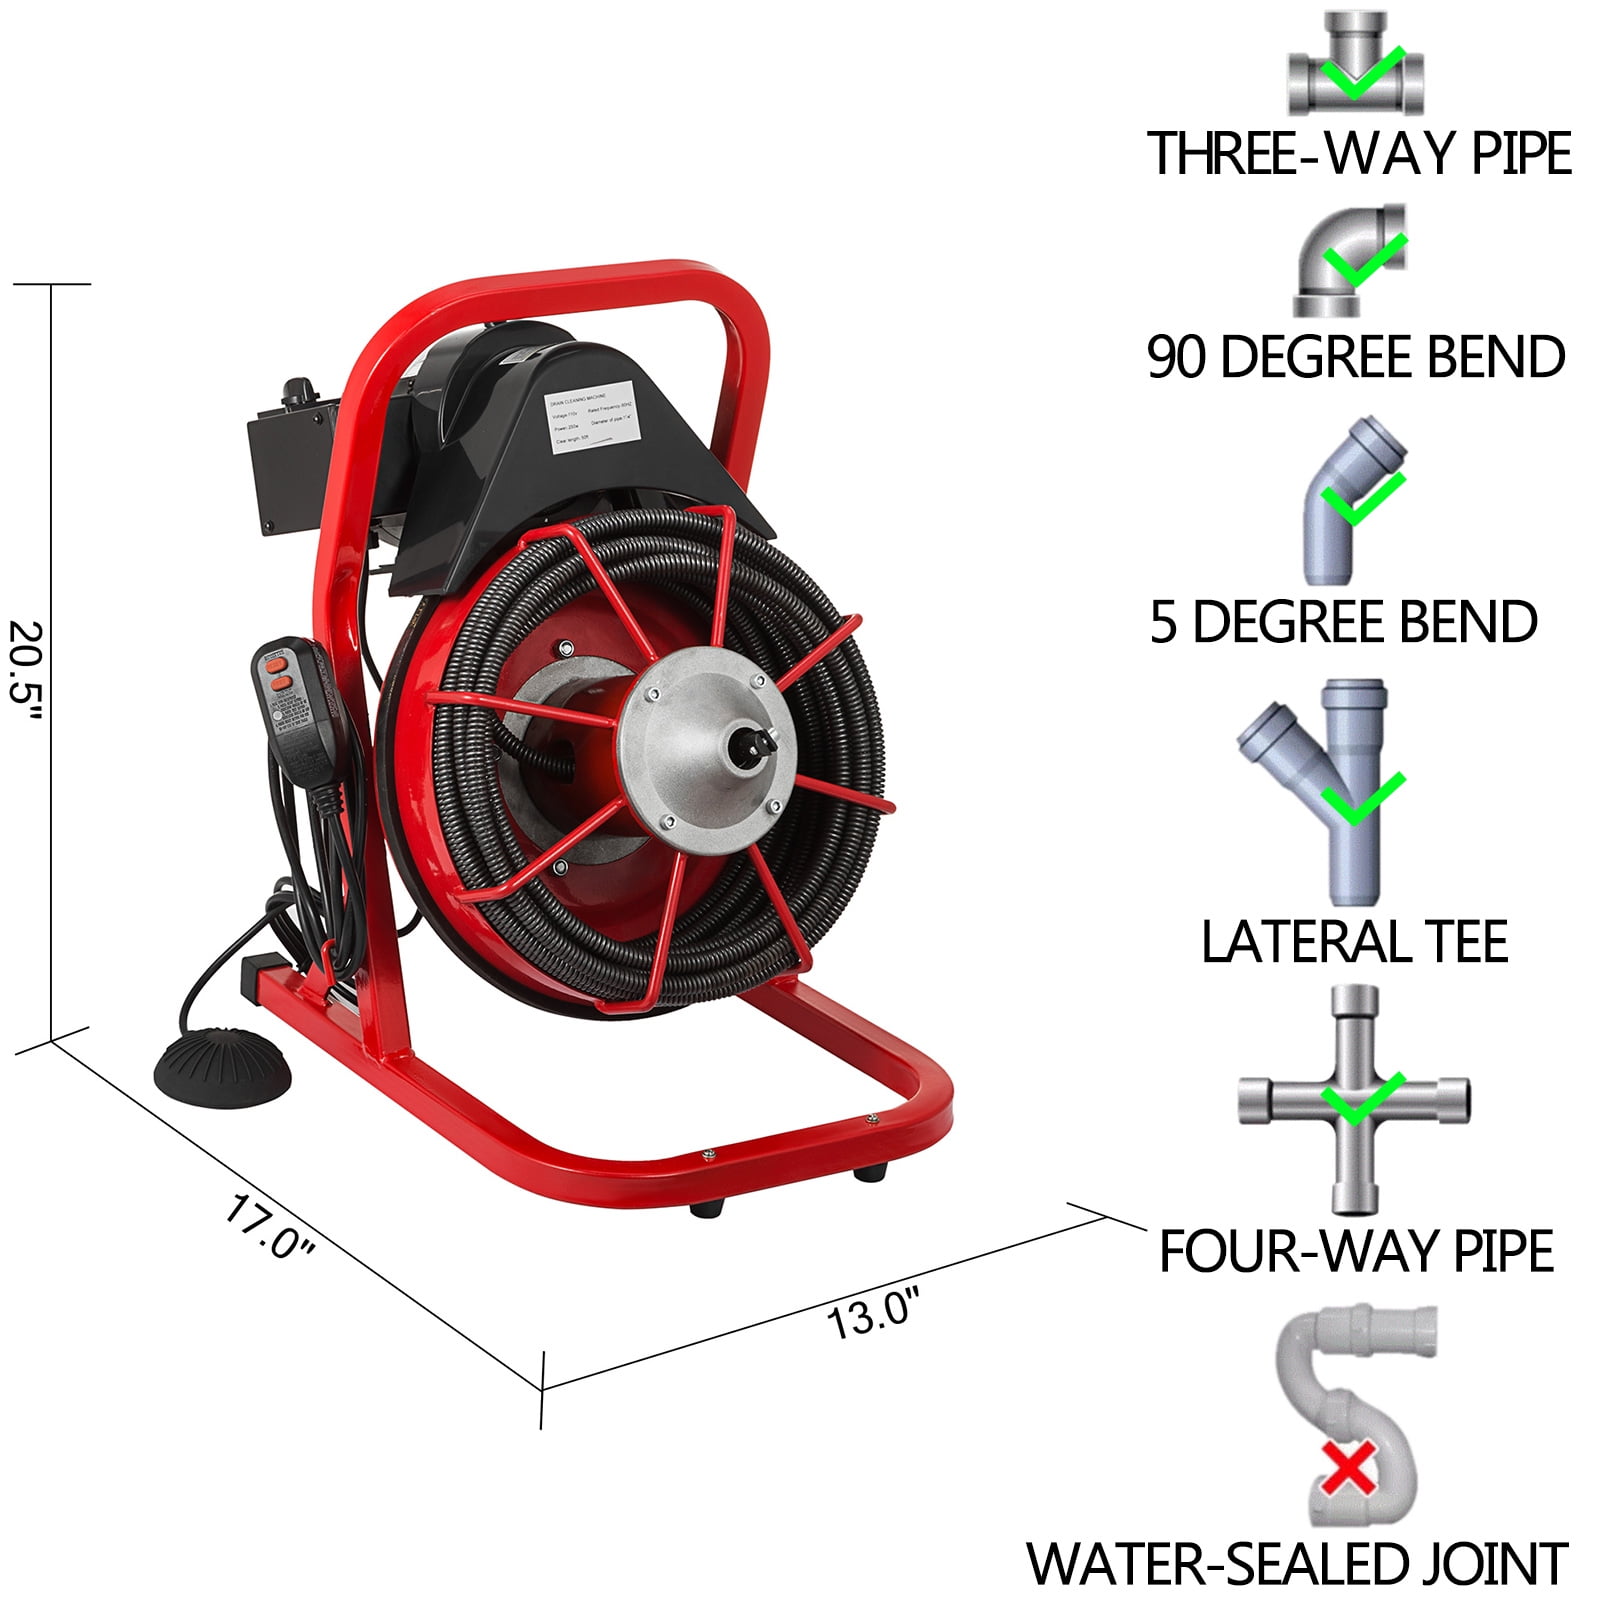 VEVOR Electric Drain Auger, 75' x 1/2, 370W Drain Cleaner Machine Fit 2''-  4'' Pipes, Plumbing Snake for Kitchen Sink, Bathroom Tub, Toilet Clogged,  Drains Dredge, Foliose Sewers